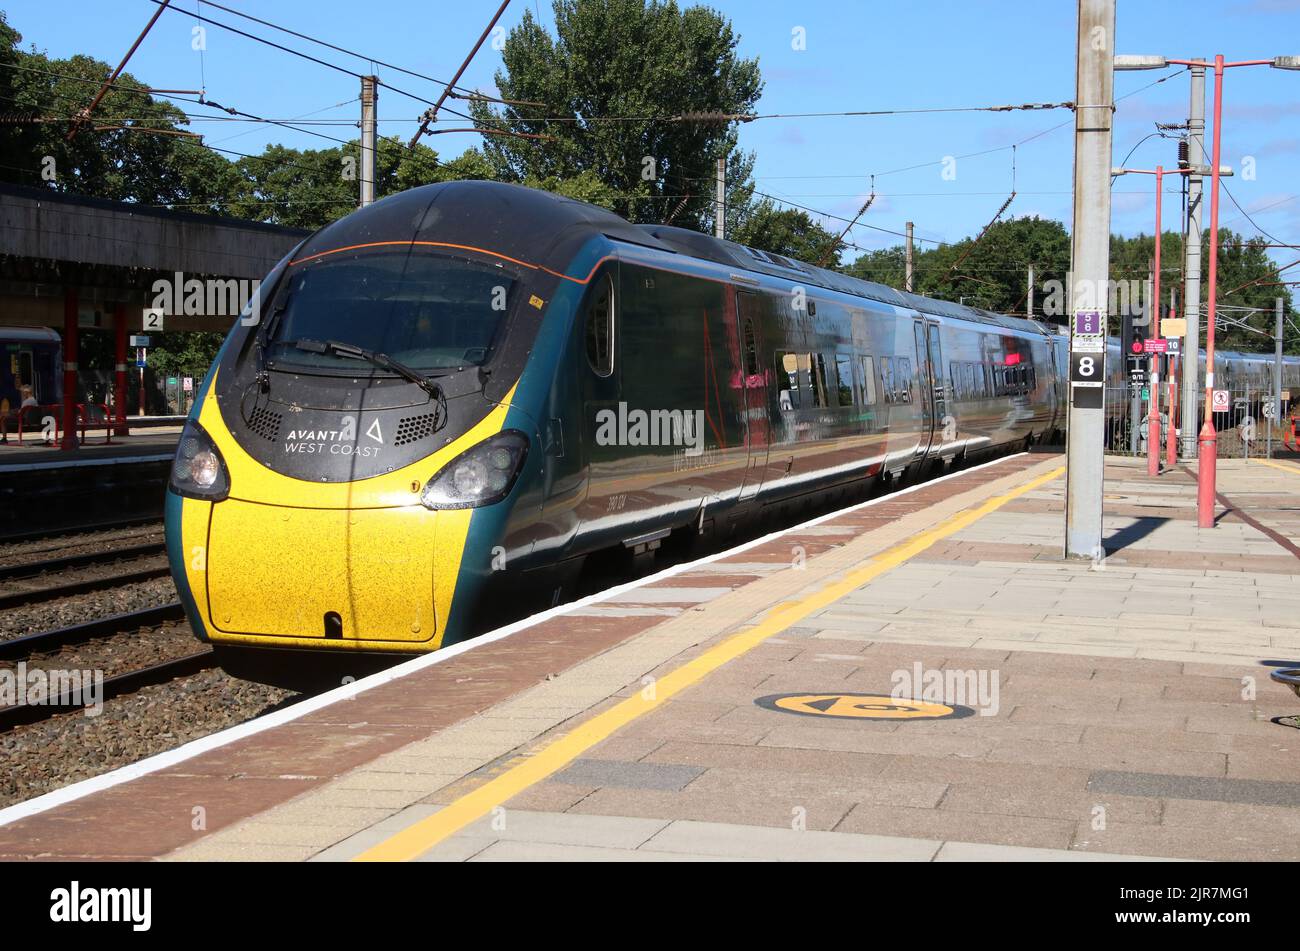 Avanti West Coast class 390 pendolino electric train arriving at Lancaster railway station on the West Coast Main Line on 17th August 2022. Stock Photo